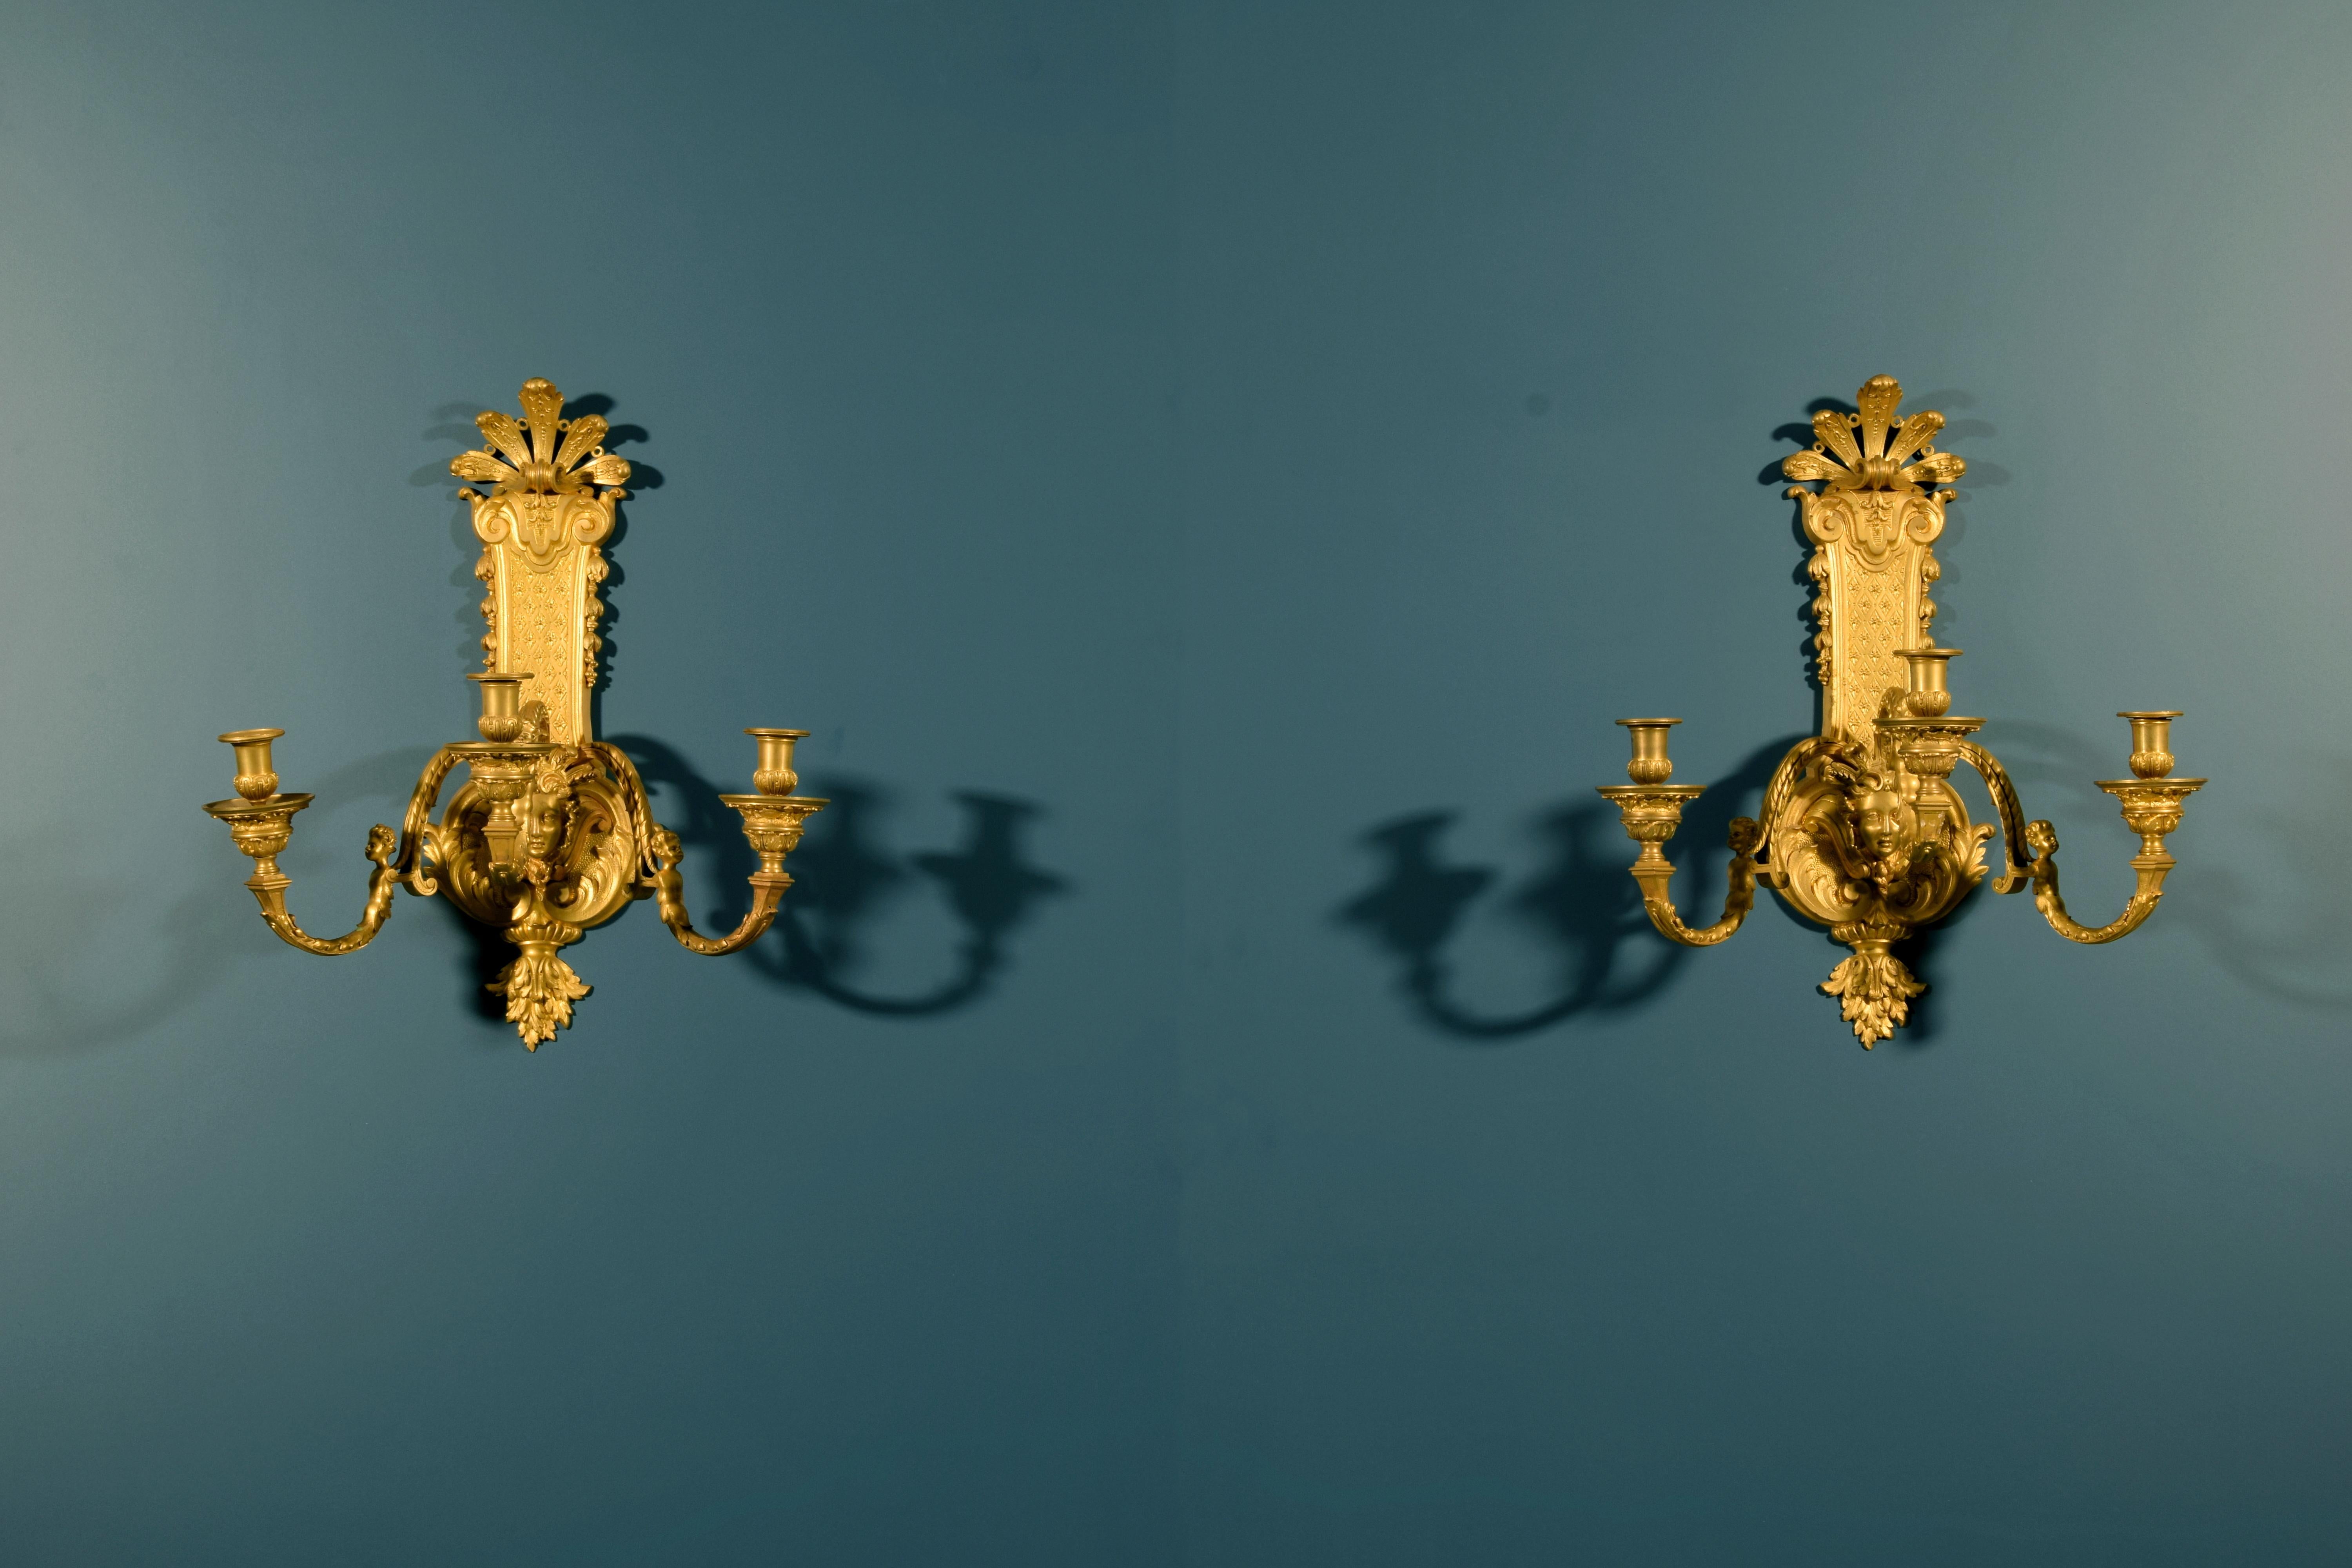 XIXth Century, Pair of French Gilt Bronze Regency Style Sconces
This delightful pair of gilded bronze sconces was made in France around the end of the 19th century in the Regency style. Finely chiselled they are composed of a central part trimmed